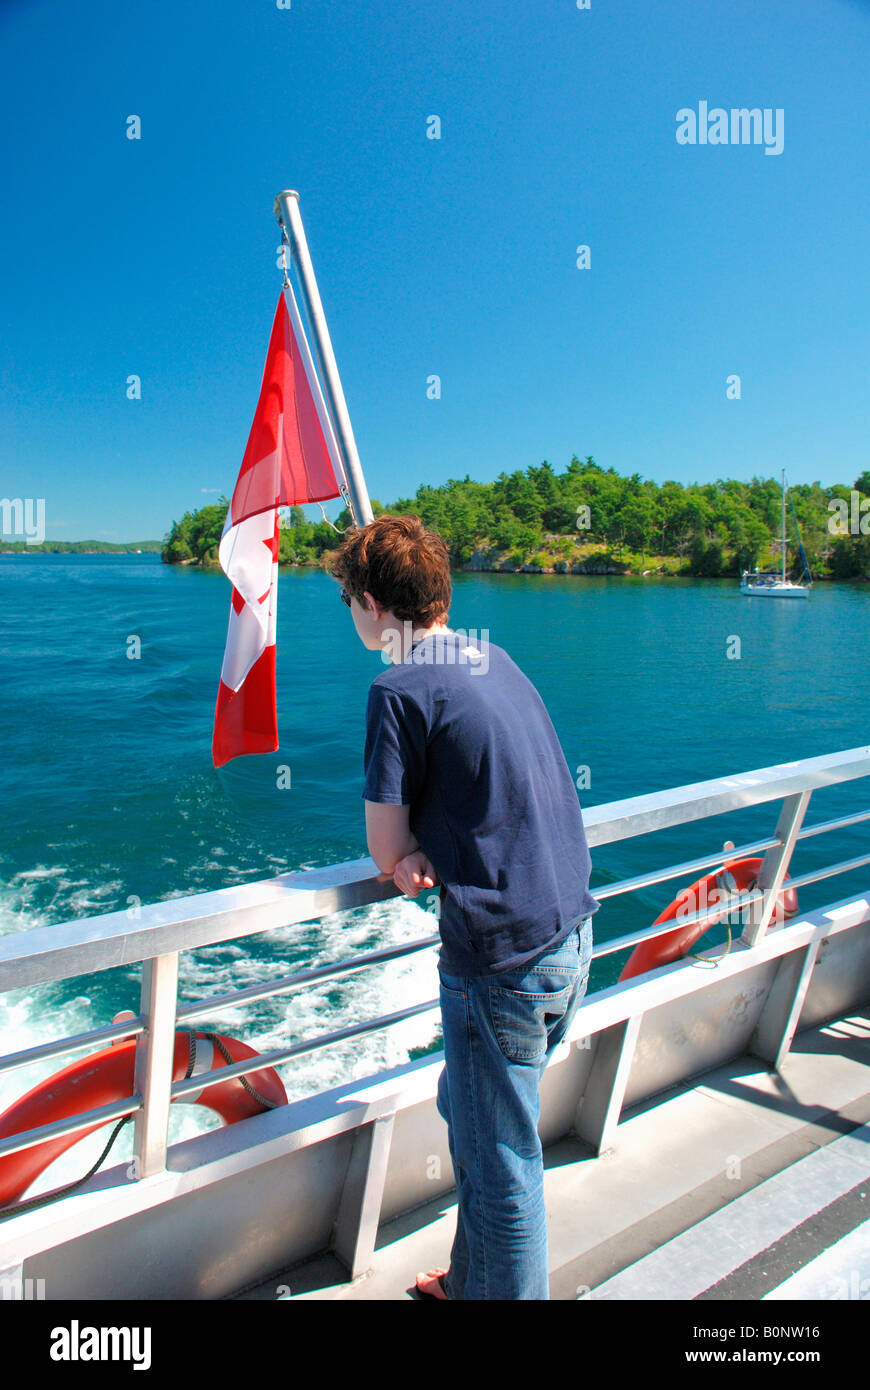 child looking over stern of thousand islands pleasure boat with Canadian flag Stock Photo